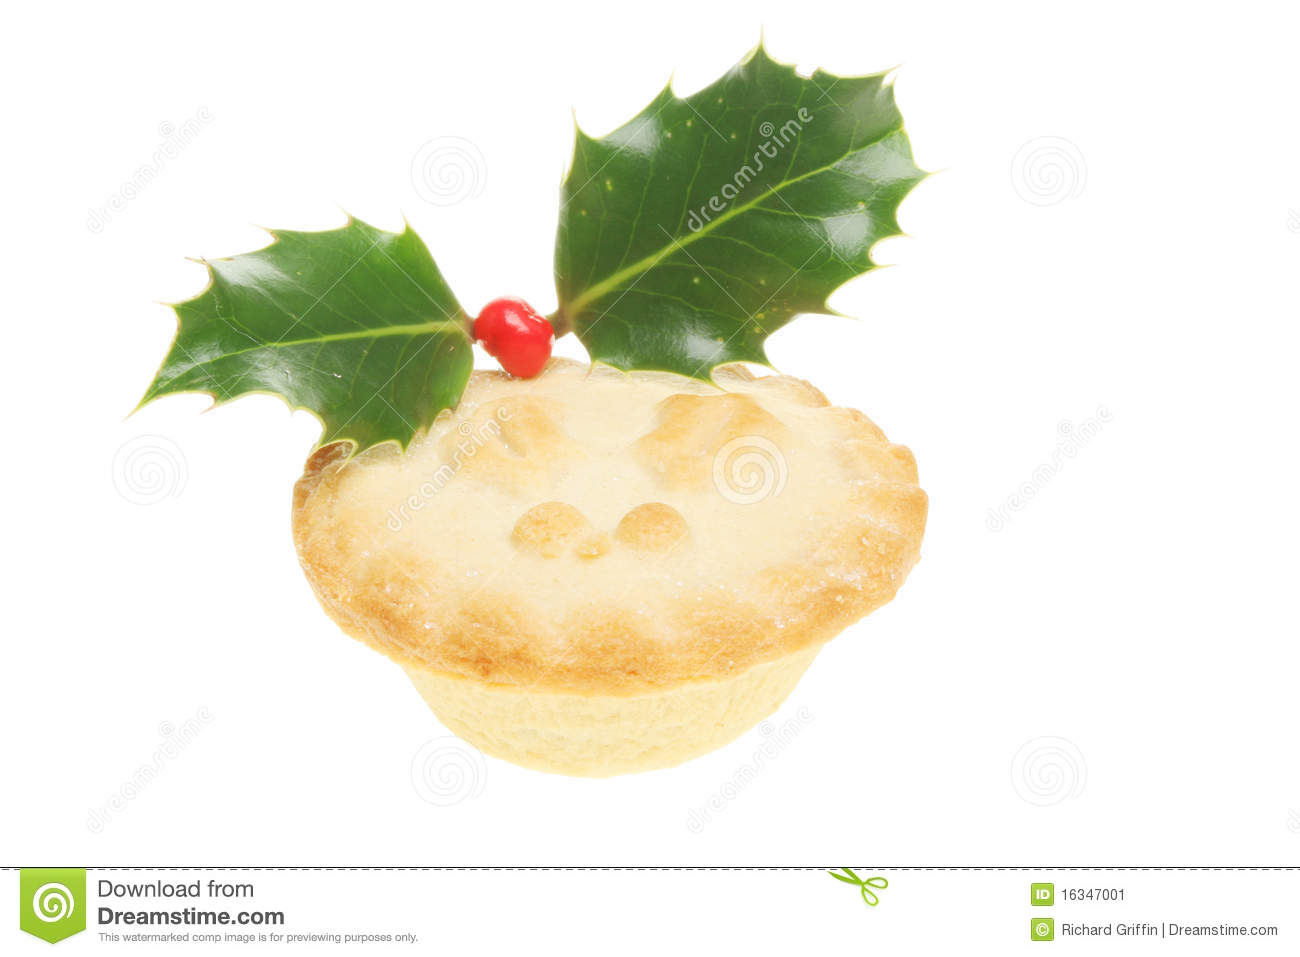 Mince Pie Decorated With A Holly Motif And A Live Sprig Of Holly With